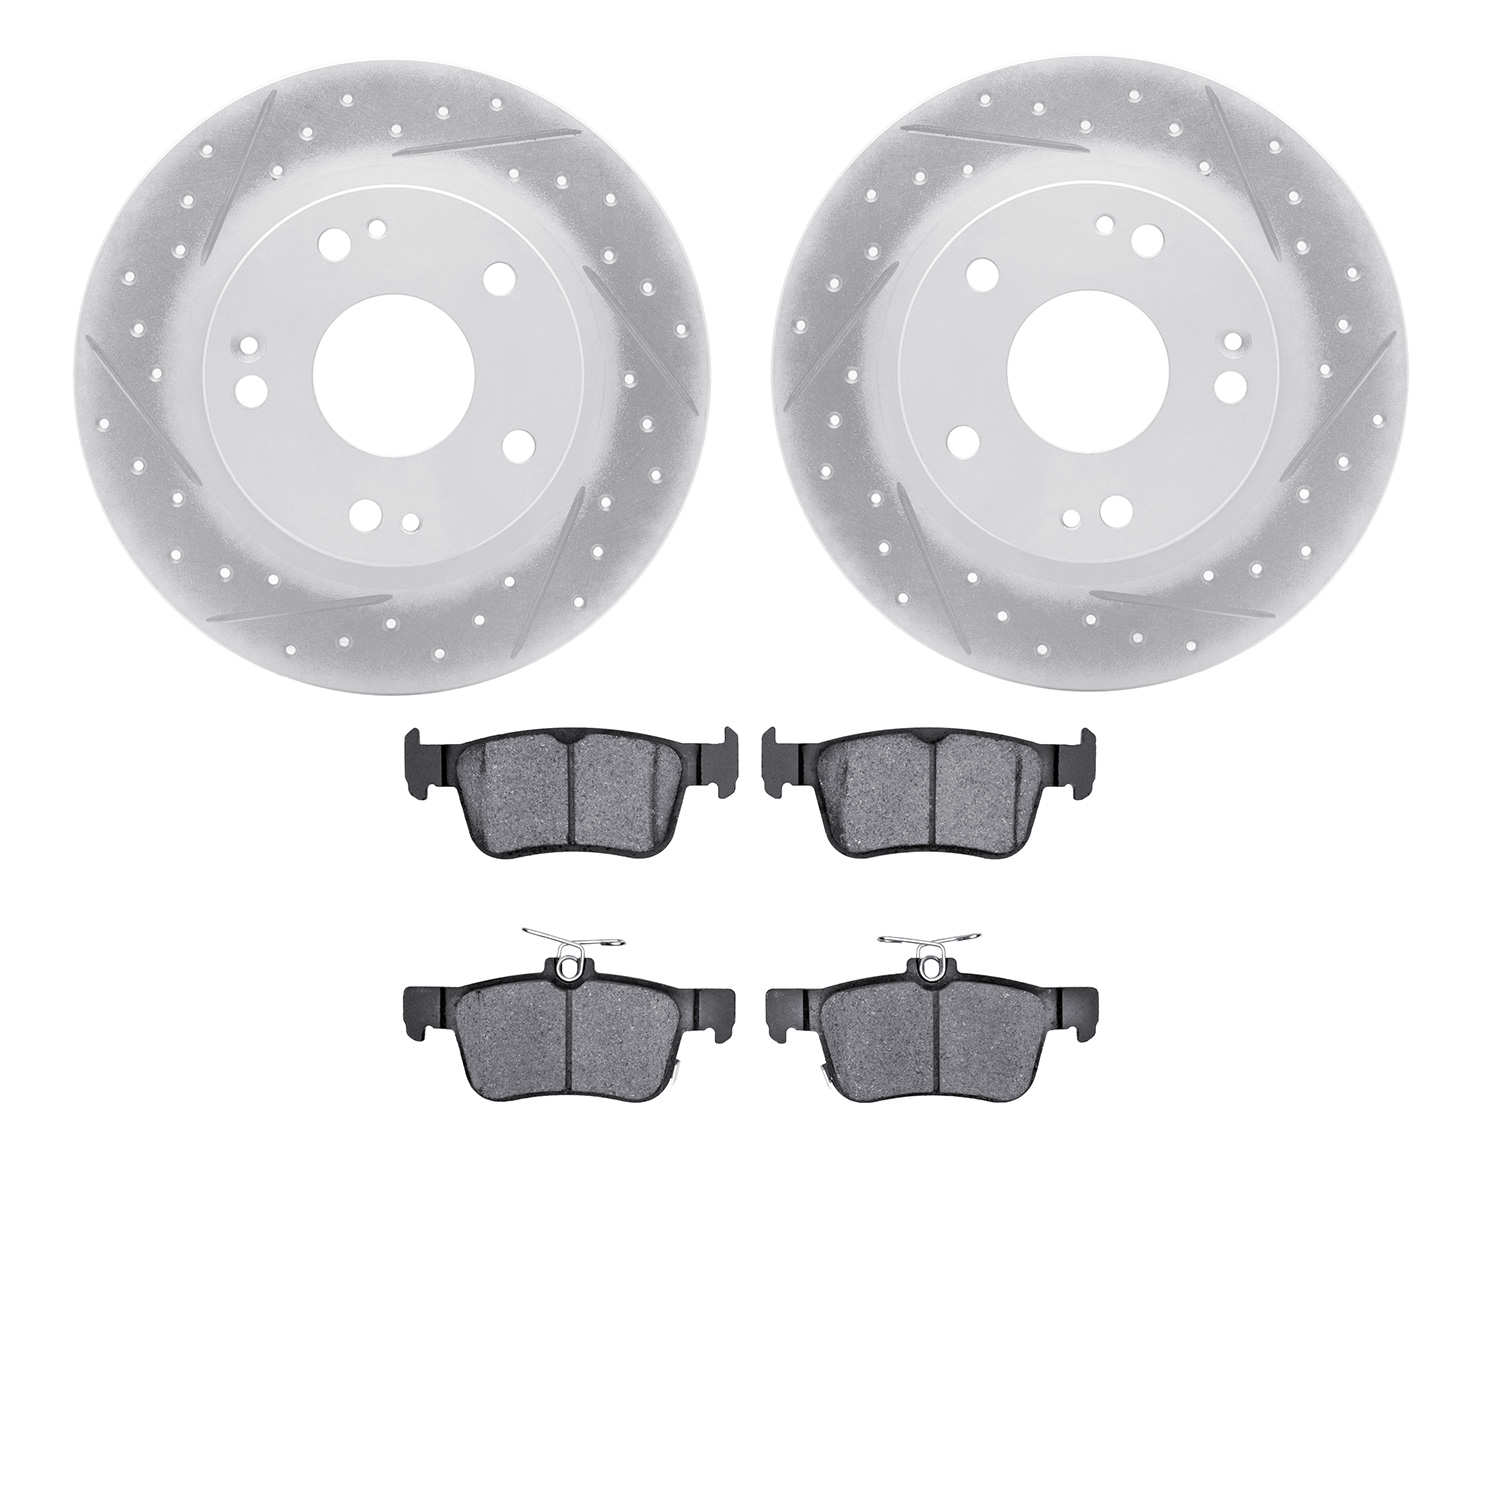 2502-59084 Geoperformance Drilled/Slotted Rotors w/5000 Advanced Brake Pads Kit, Fits Select Acura/Honda, Position: Rear